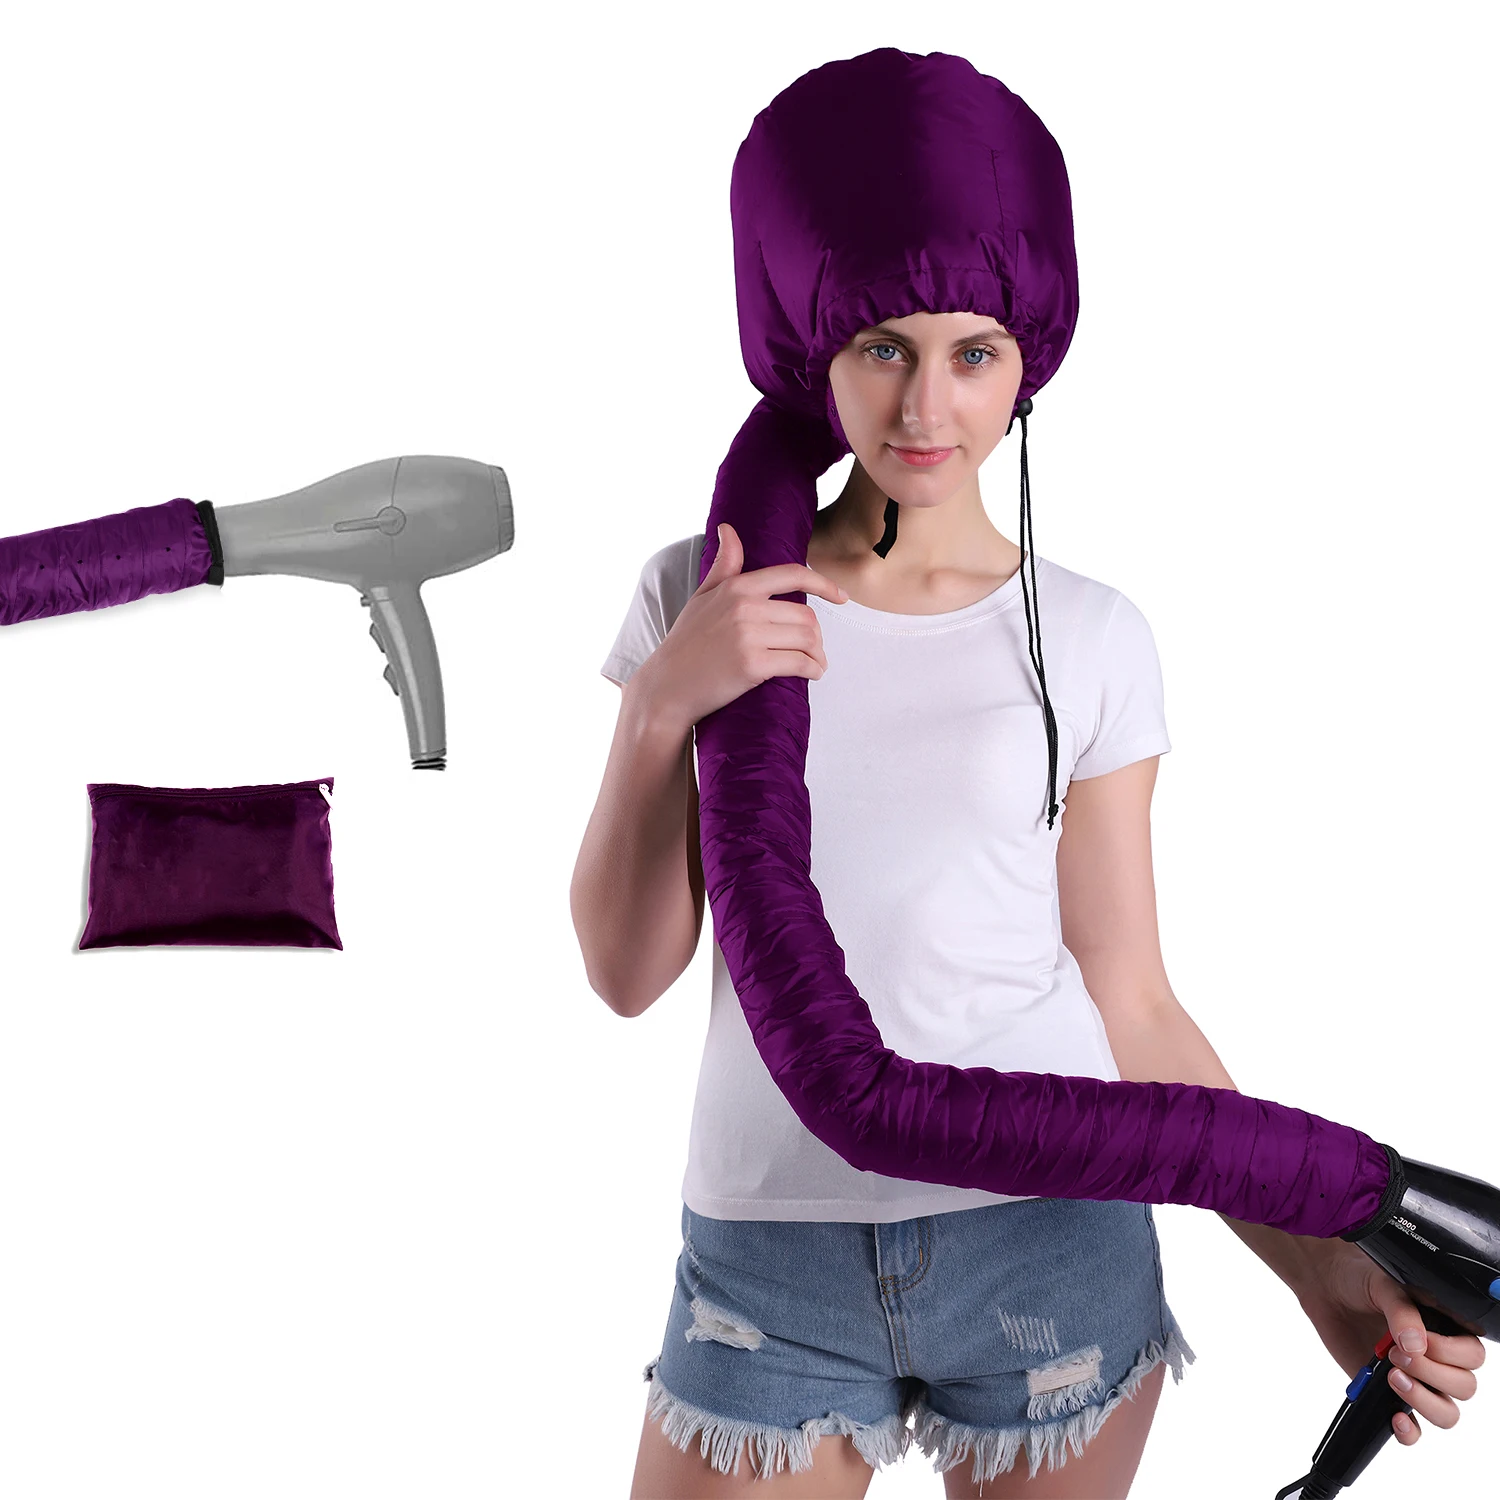 Soft Bonnet Hooded Hair Dryer Attachment For Natural Curly Textured Hair  Care| Drying,Styling,Portable Bonnet Hair Dryer - Buy Bonnet Hair Dryer, Bonnet Hood Hair Dryer Attachment,Hair Bonnet Hood Hair Dryer Attachment  Product on